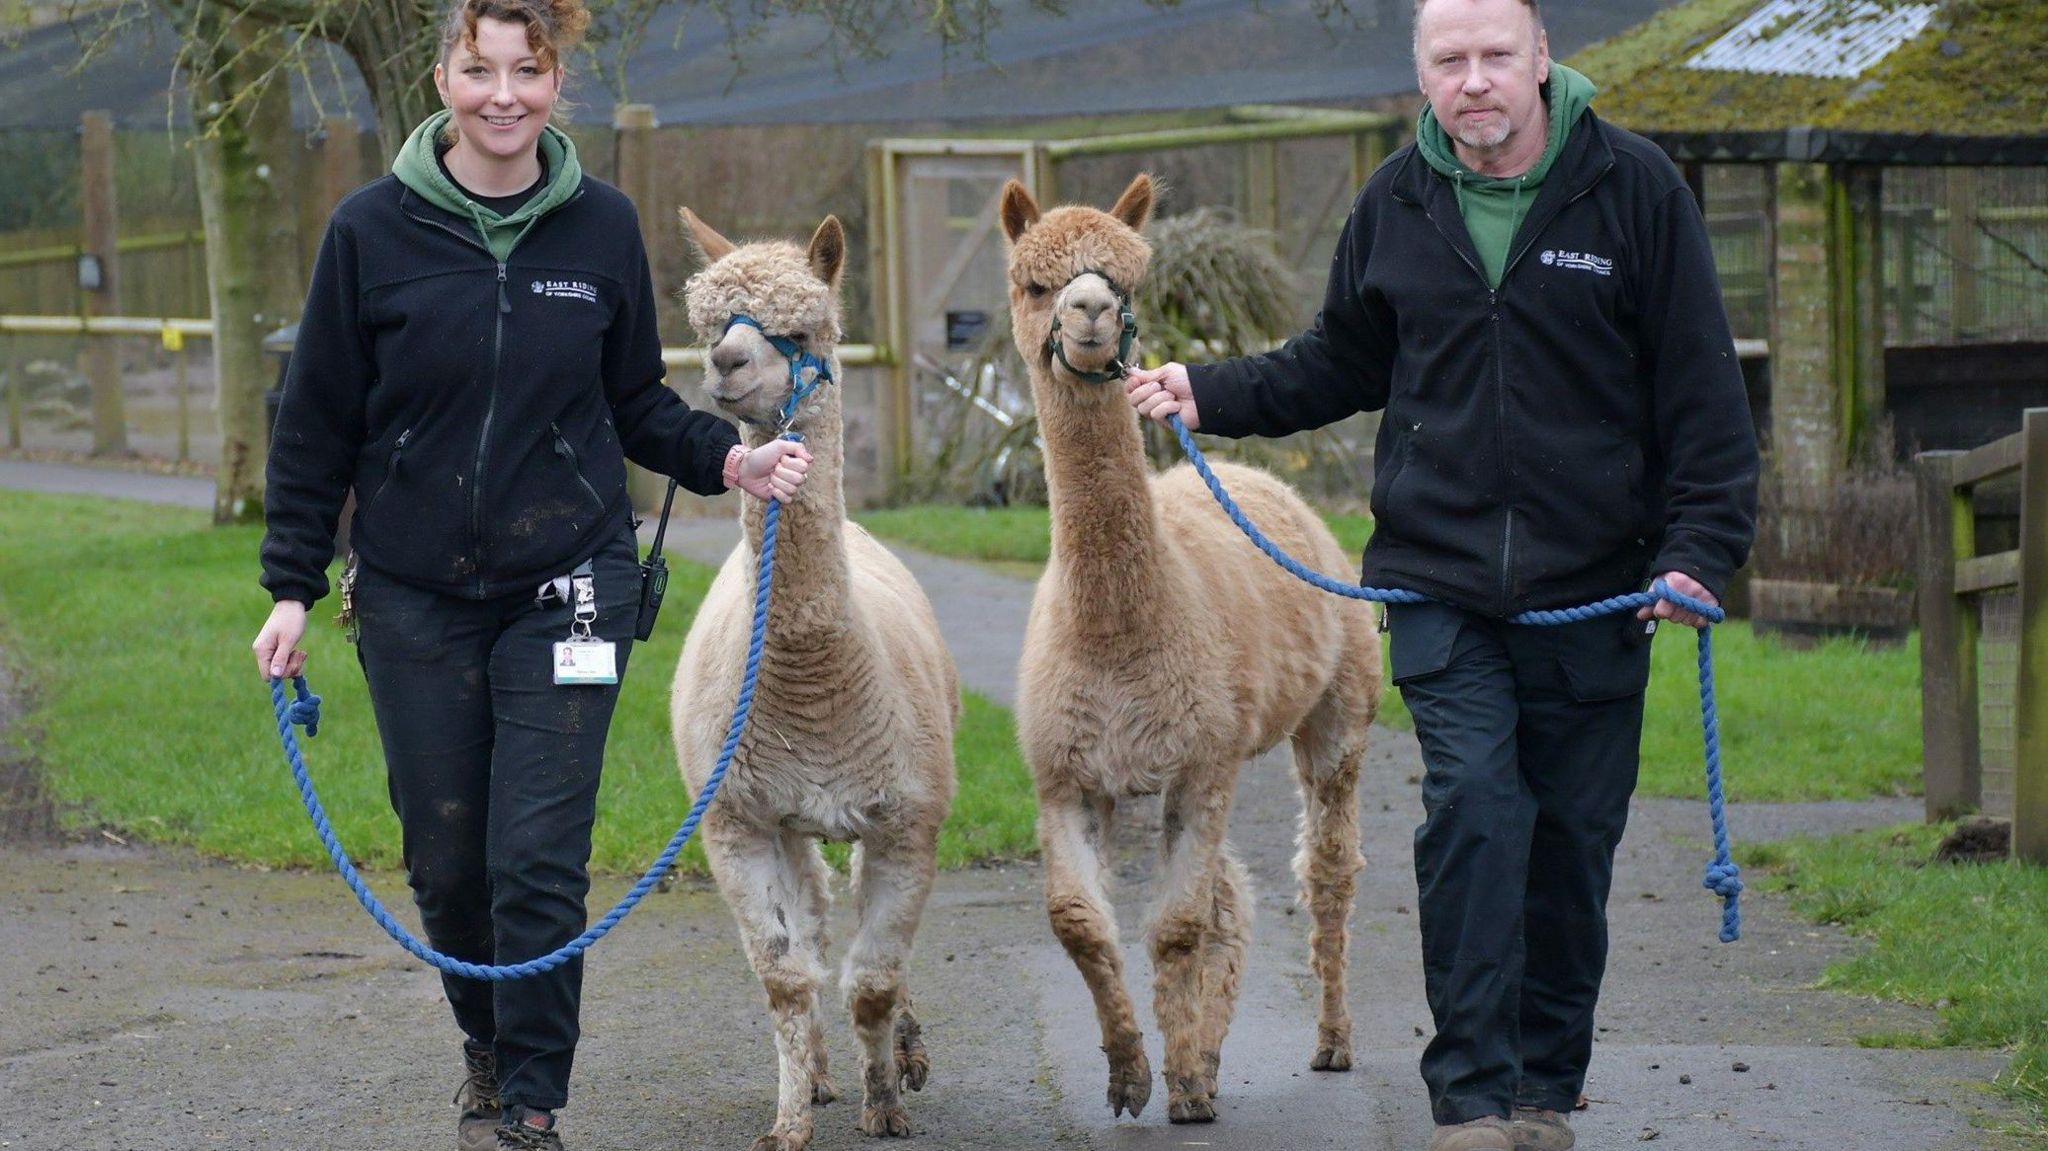 Two keepers walking with two alpacas